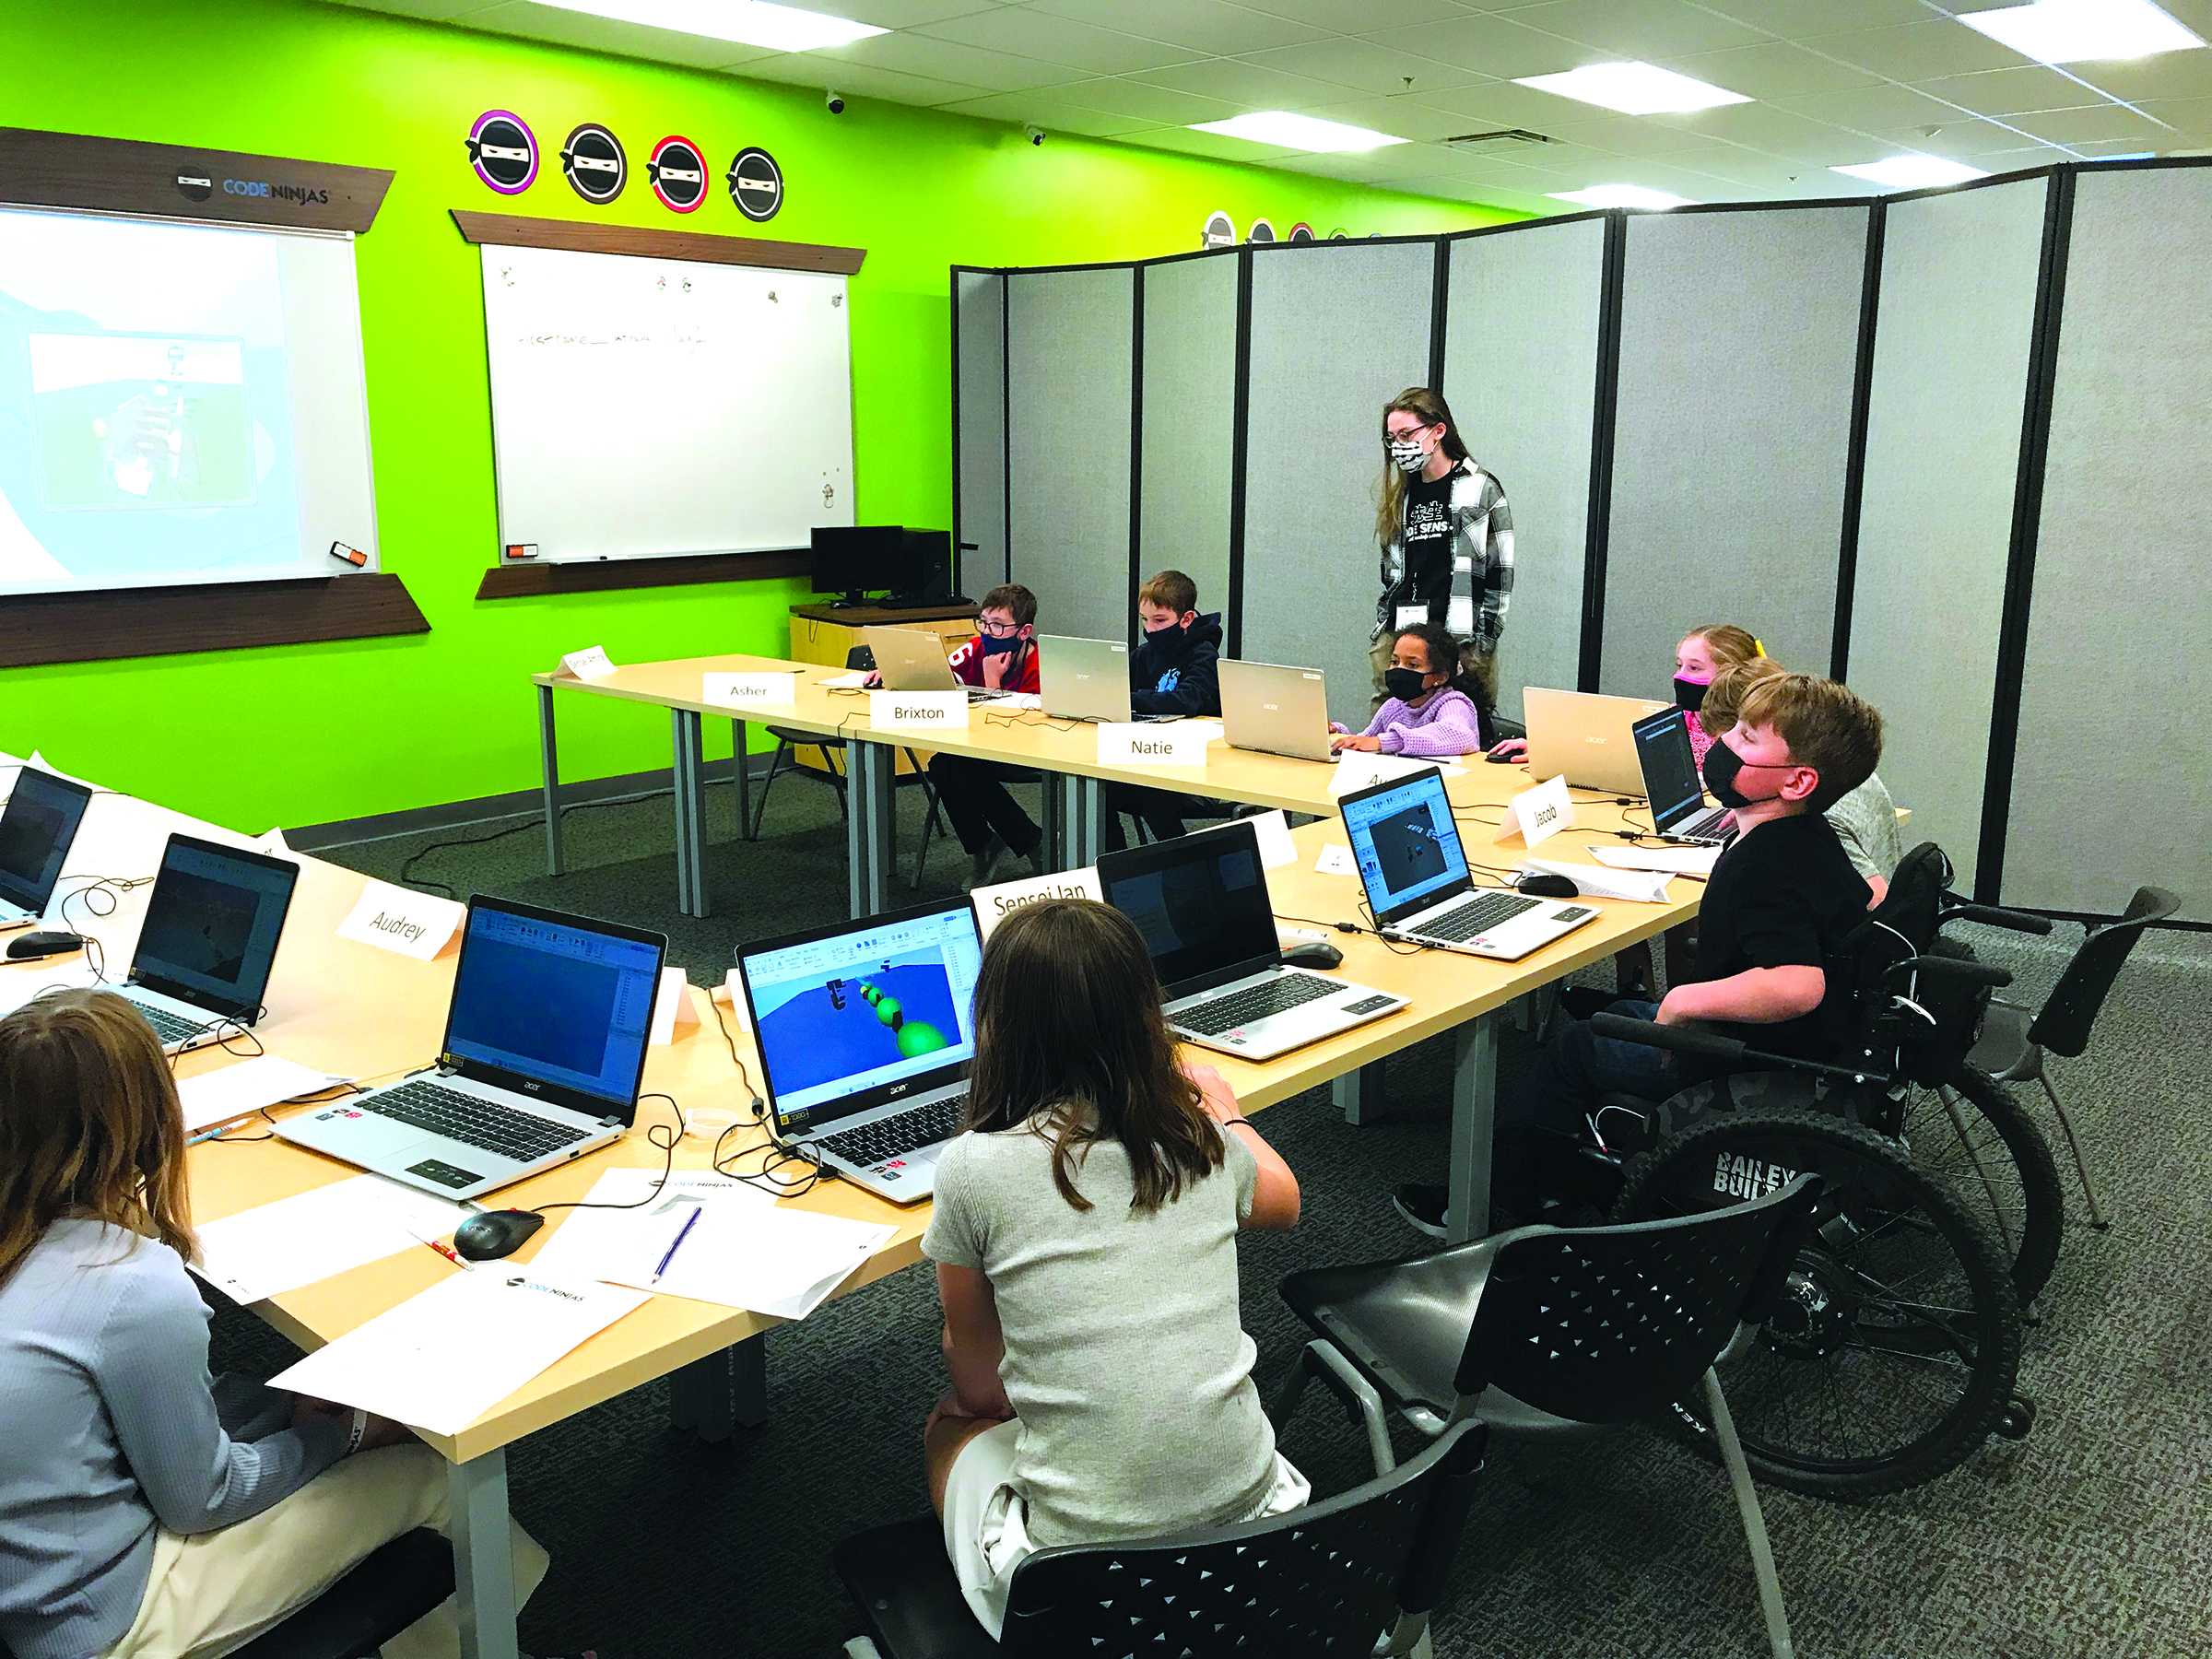 Teaching computer programming and STEM skills for the future